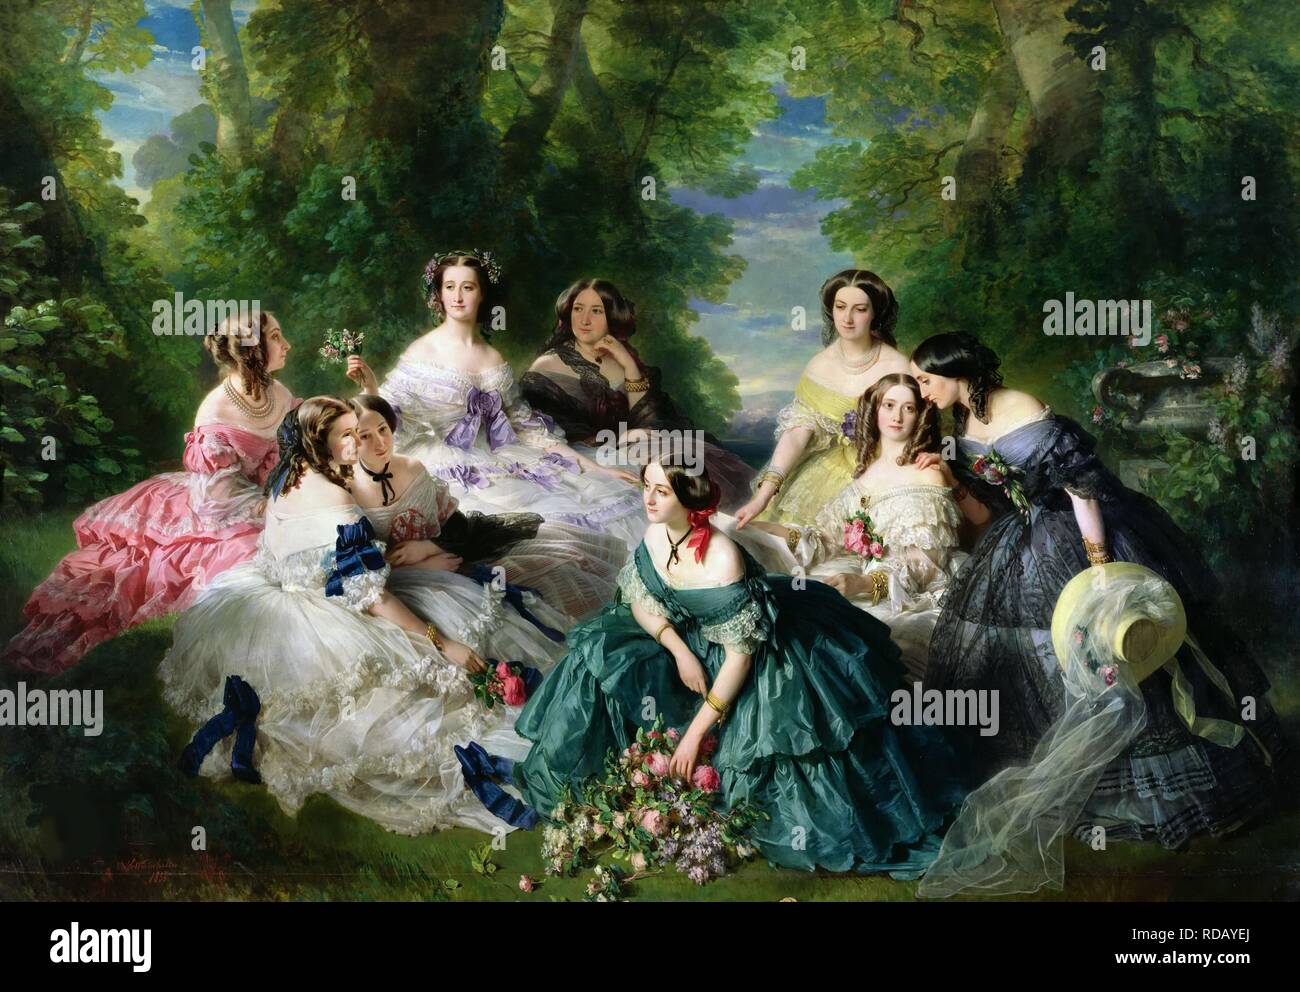 1855 – Franz-Xaver Winterhalter, The Empress Eugénie Surrounded by her  Ladies-in-Waiting